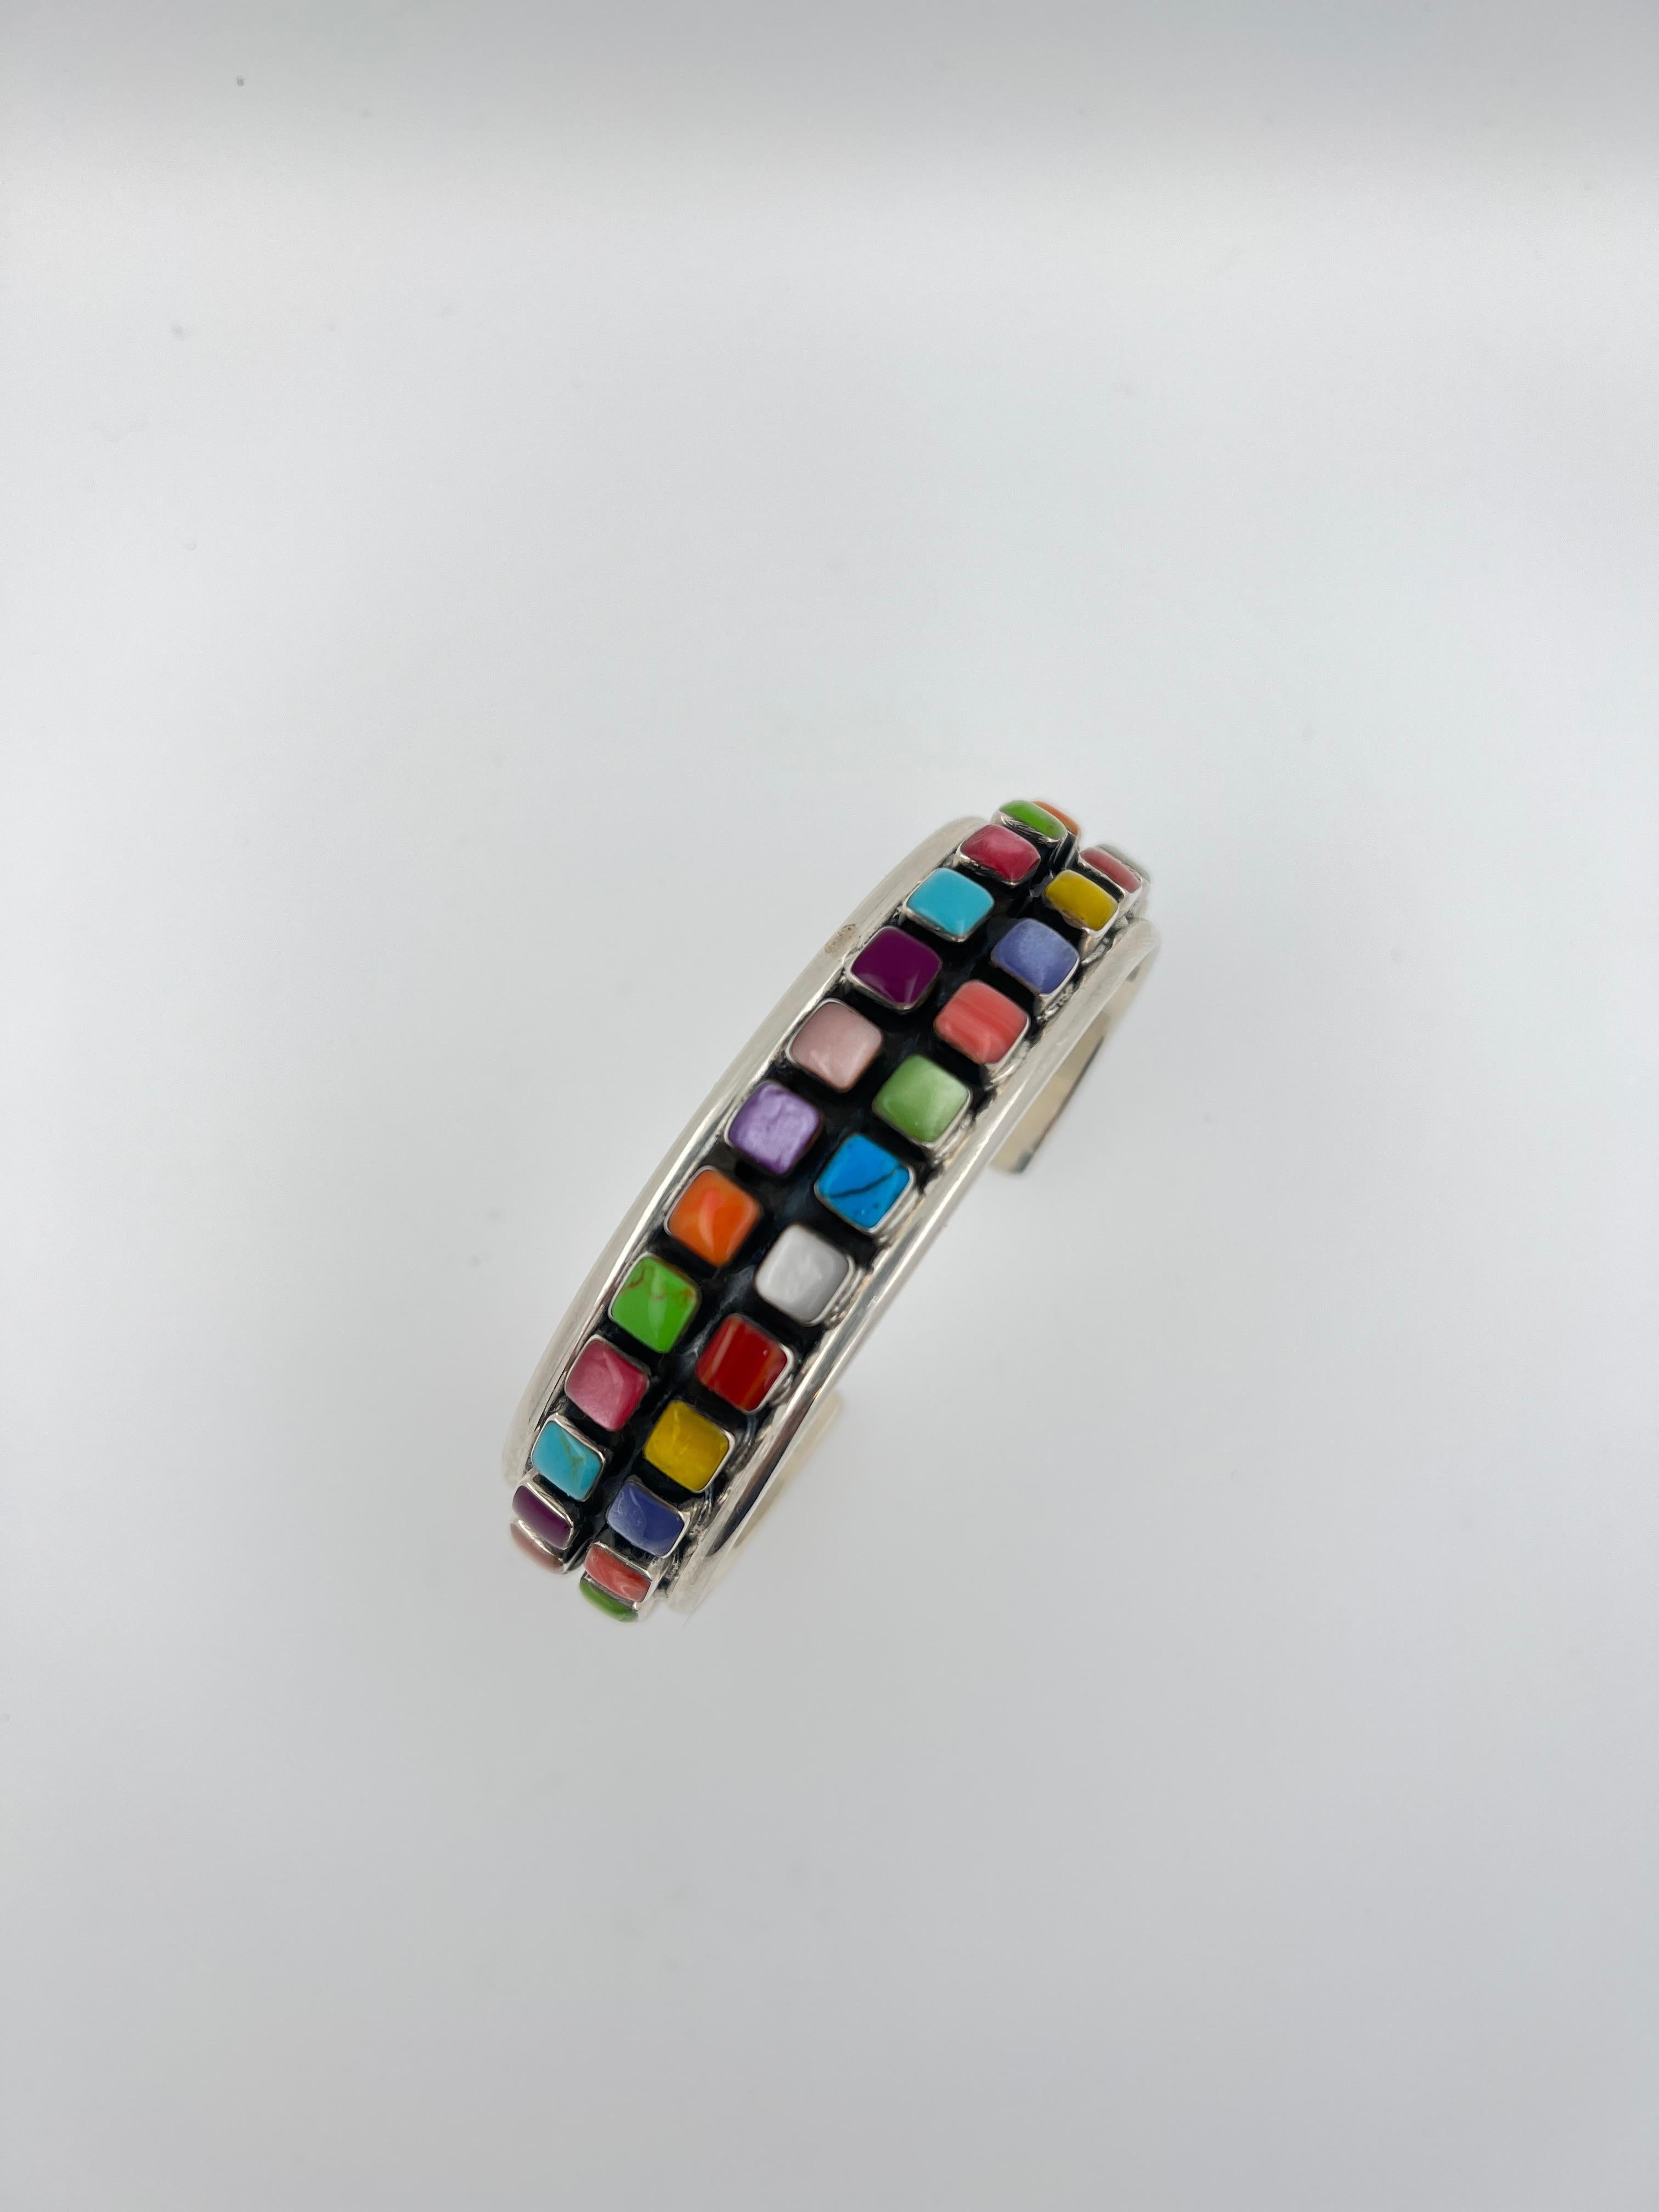 Geometric Colored Rainbow Cab Gemstone Sterling Silver Wide Cuff Bangle Bracelet For Sale 4